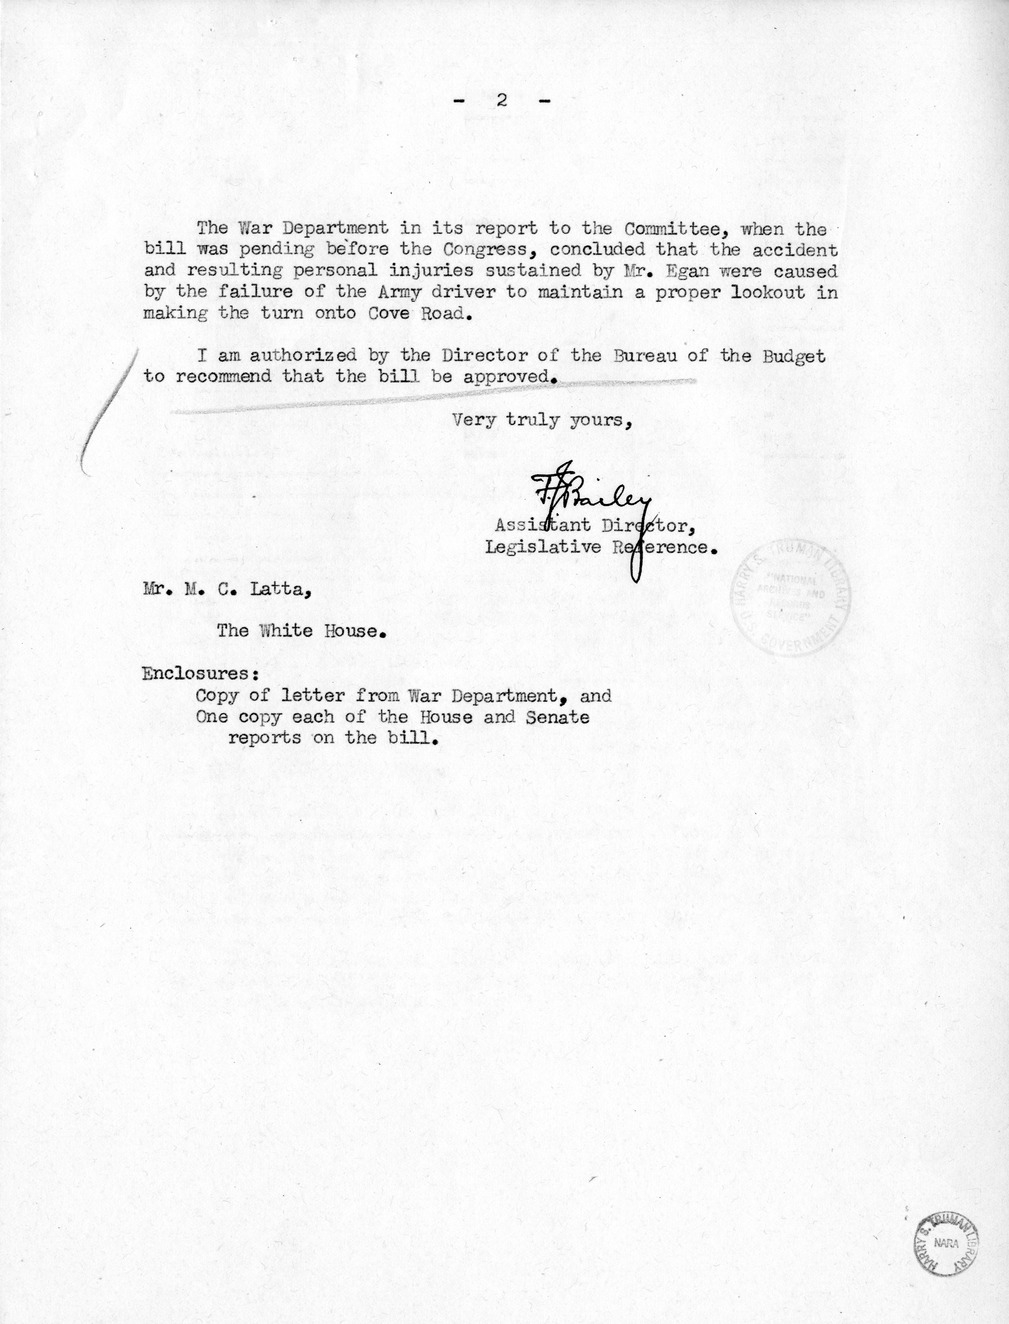 Memorandum from Frederick J. Bailey to M. C. Latta, S. 909, For the Relief of Hugh Egan, with Attachments